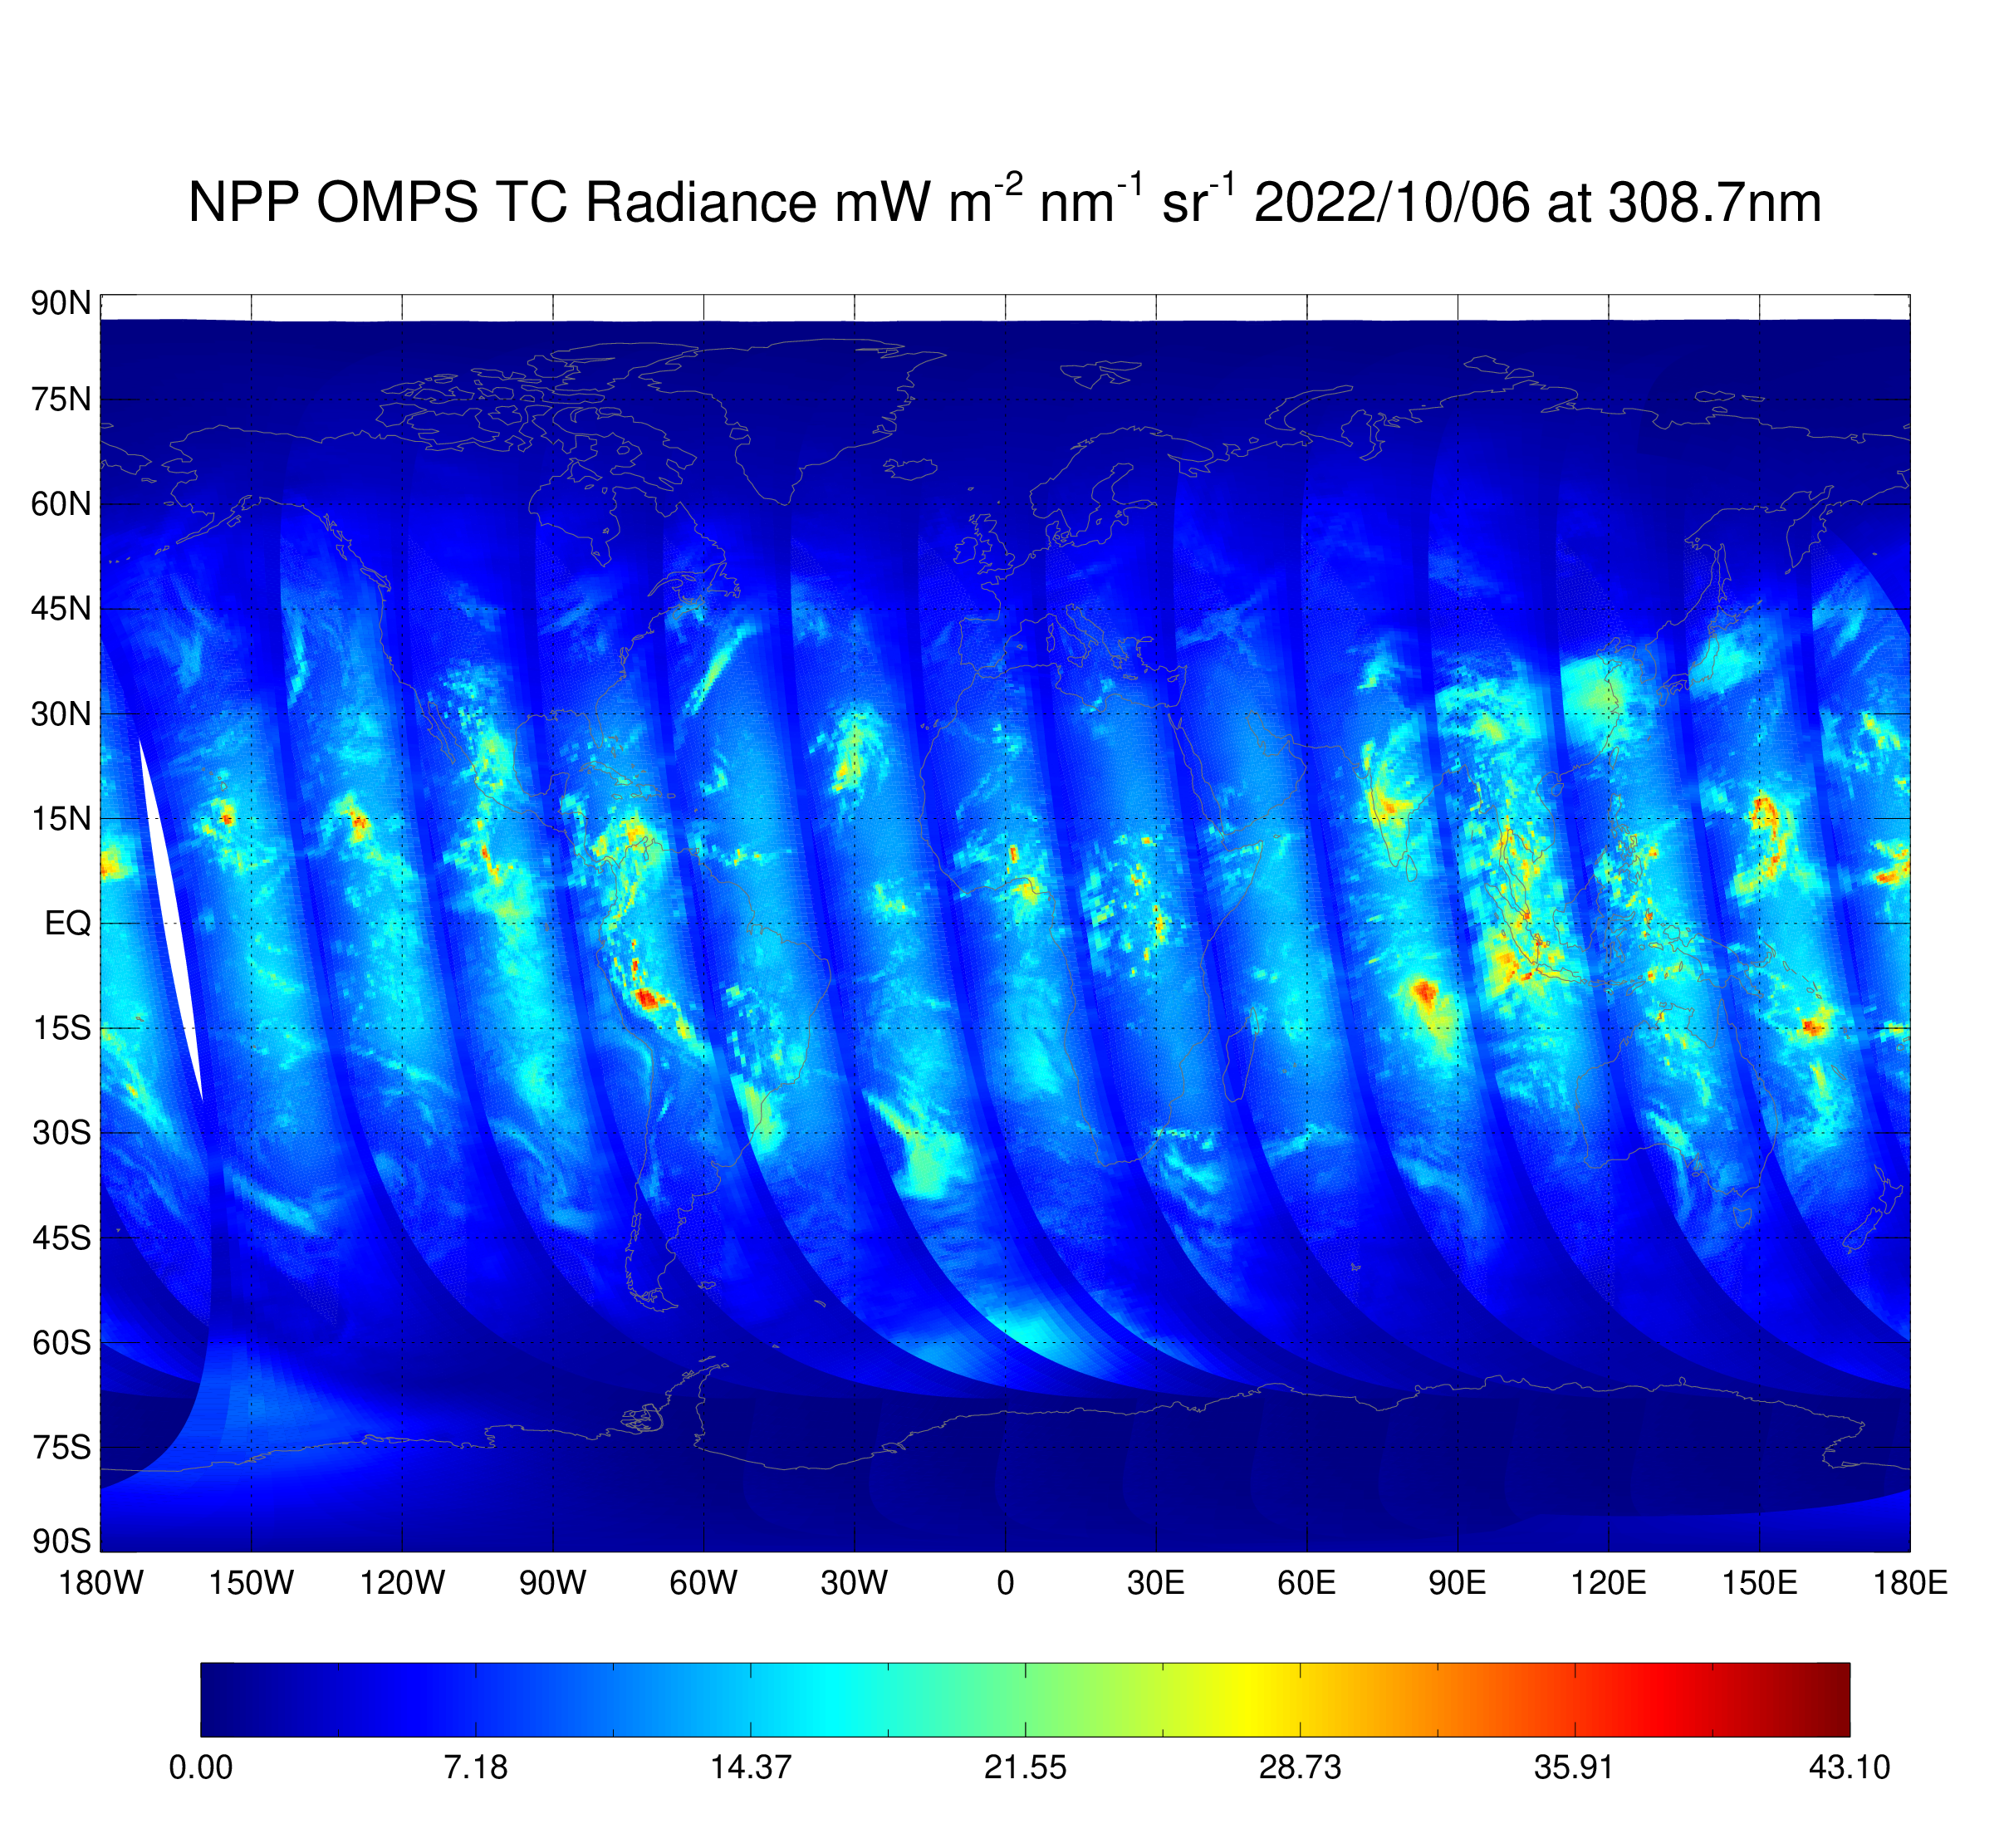 NPP OMPS NM  - NM Earth View Radiance - Radiance Map at 308.7 nm - 10/06/2022